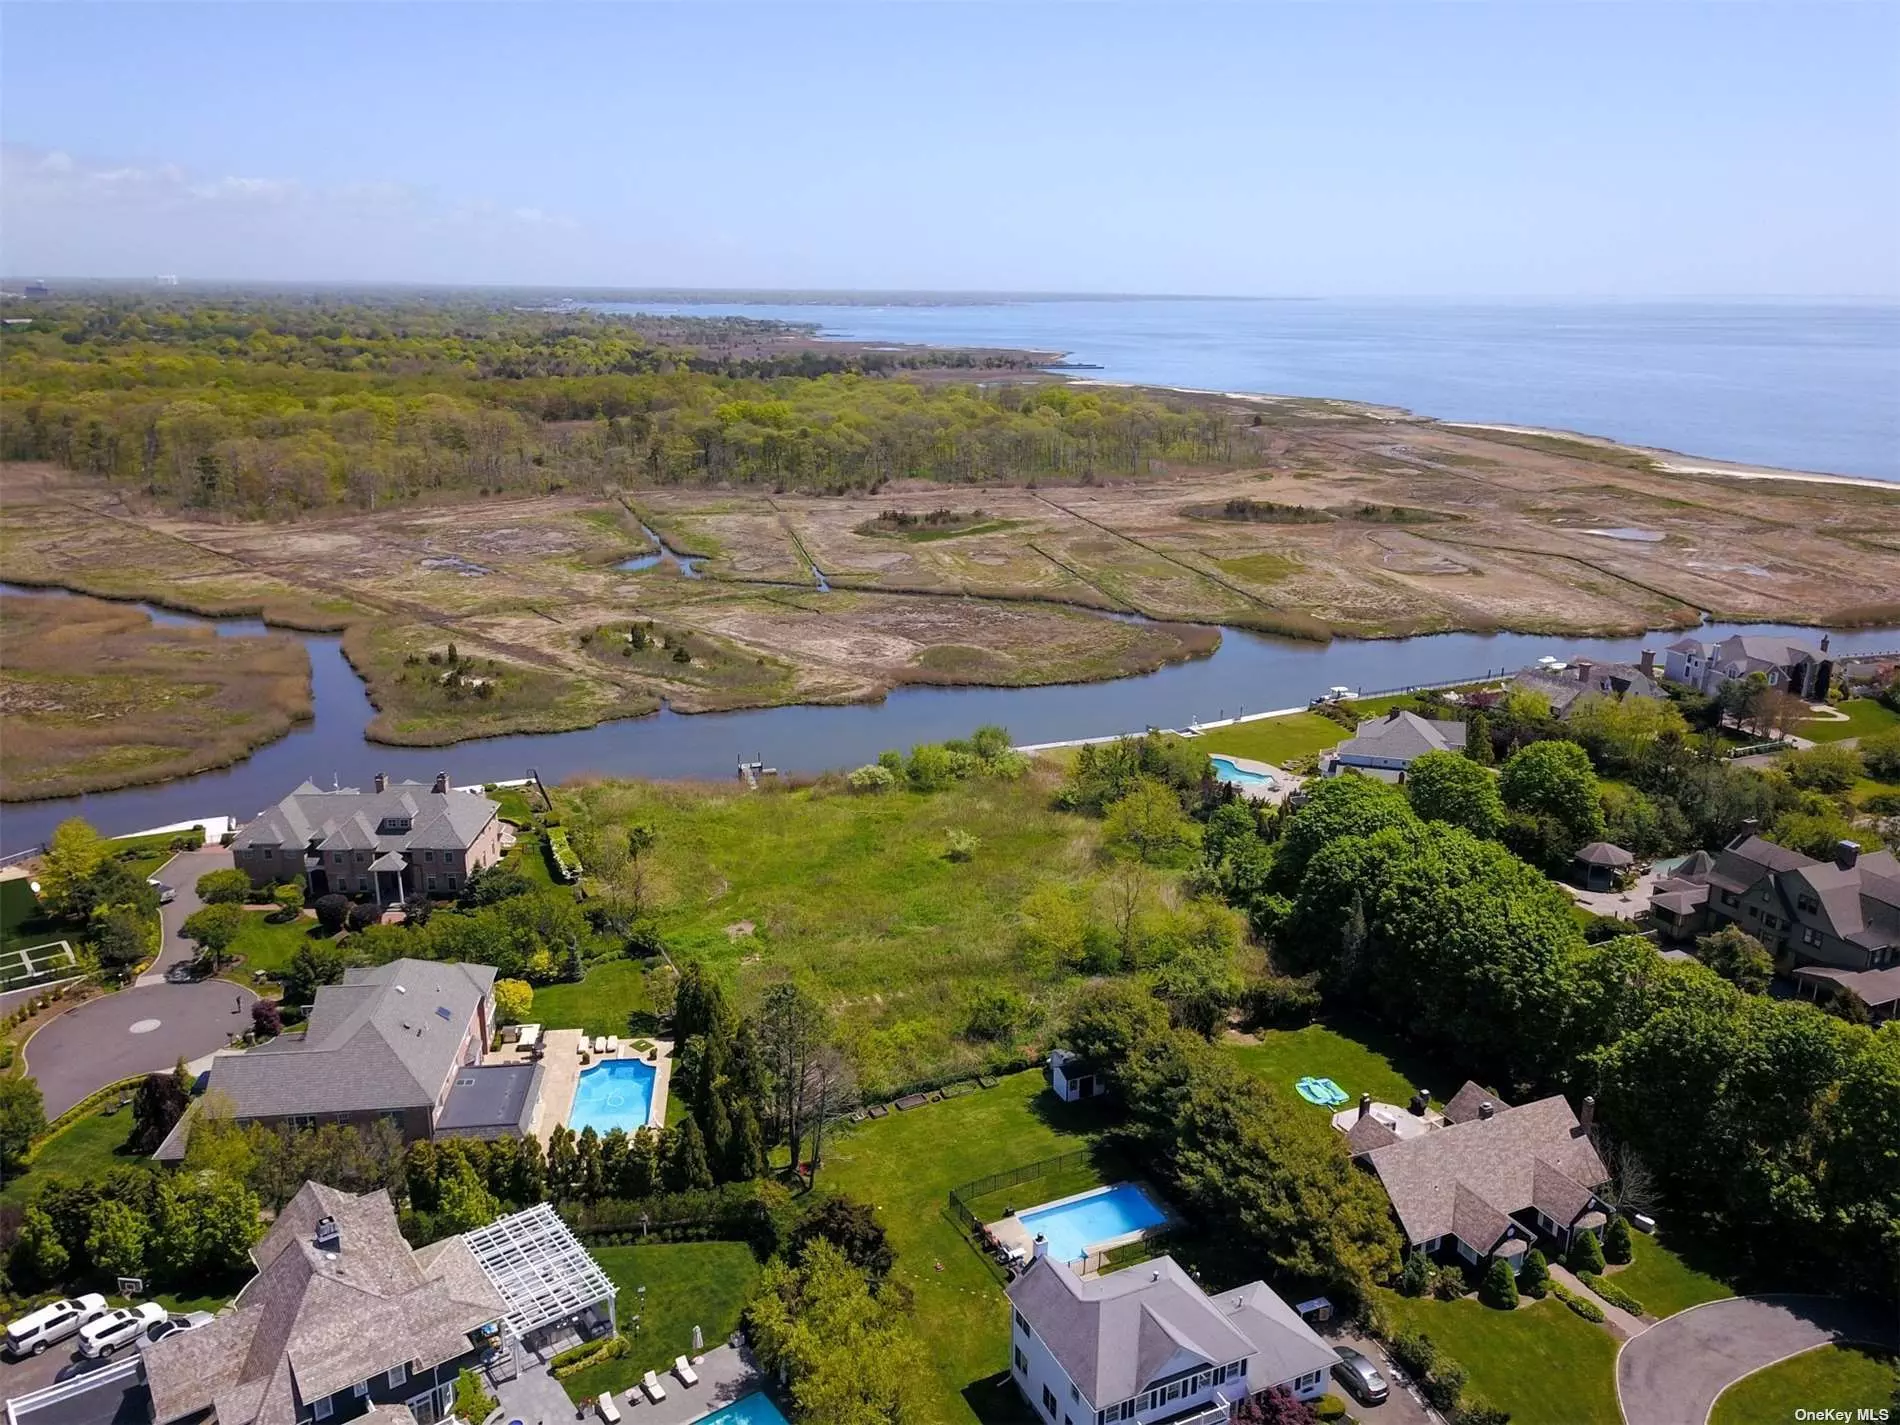 A land opportunity like you&rsquo;ve never seen before, and never will again! A TREMENDOUS 1.6 Acre lot with over 220 feet of waterfront on Trues Creek, and stunning, uninterrupted views over Gardiners Park. And now after 2 years of planning and application, a 5, 000 square foot masterpiece is fully approved to be built! The purchase of this land includes all the architectural plans and municipal requirements, and is shovel ready NOW! This is the last undeveloped piece of waterfront land around for miles, and certainly is the best for last! Build your dream here!